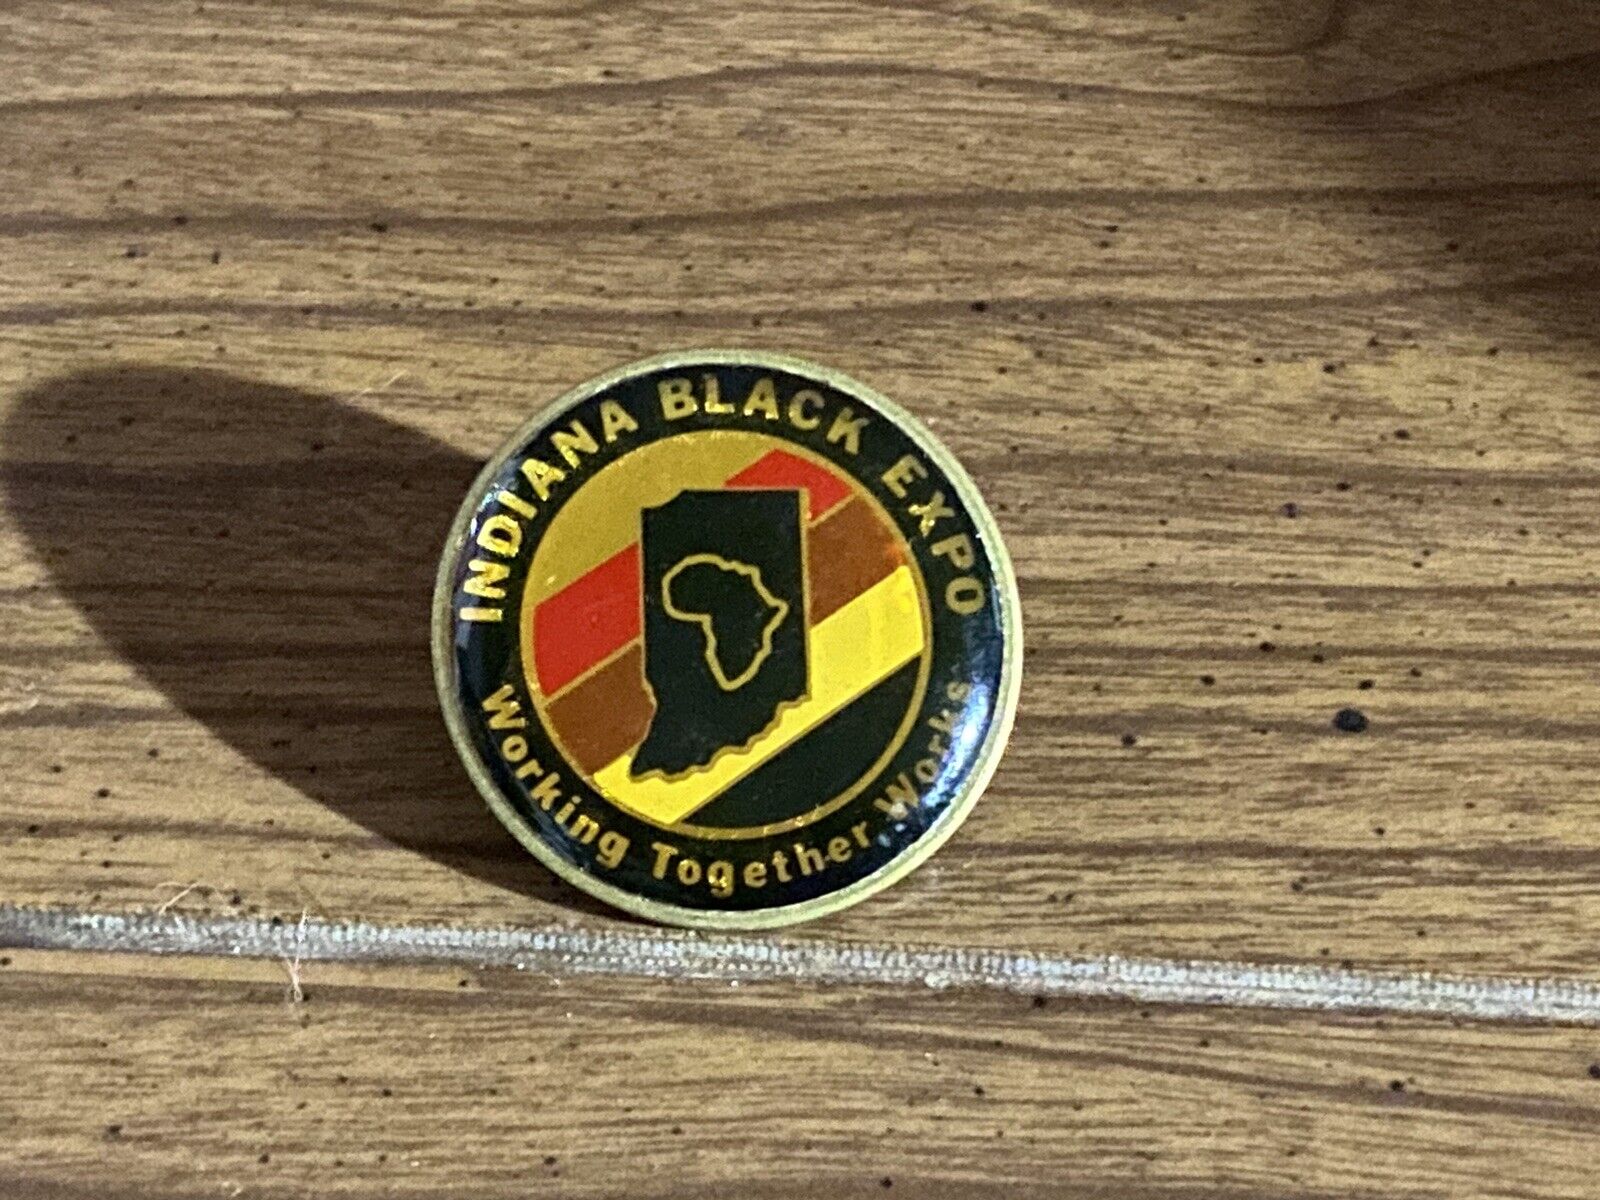 Collectible Pin: Indiana Black Expo Working Together Works